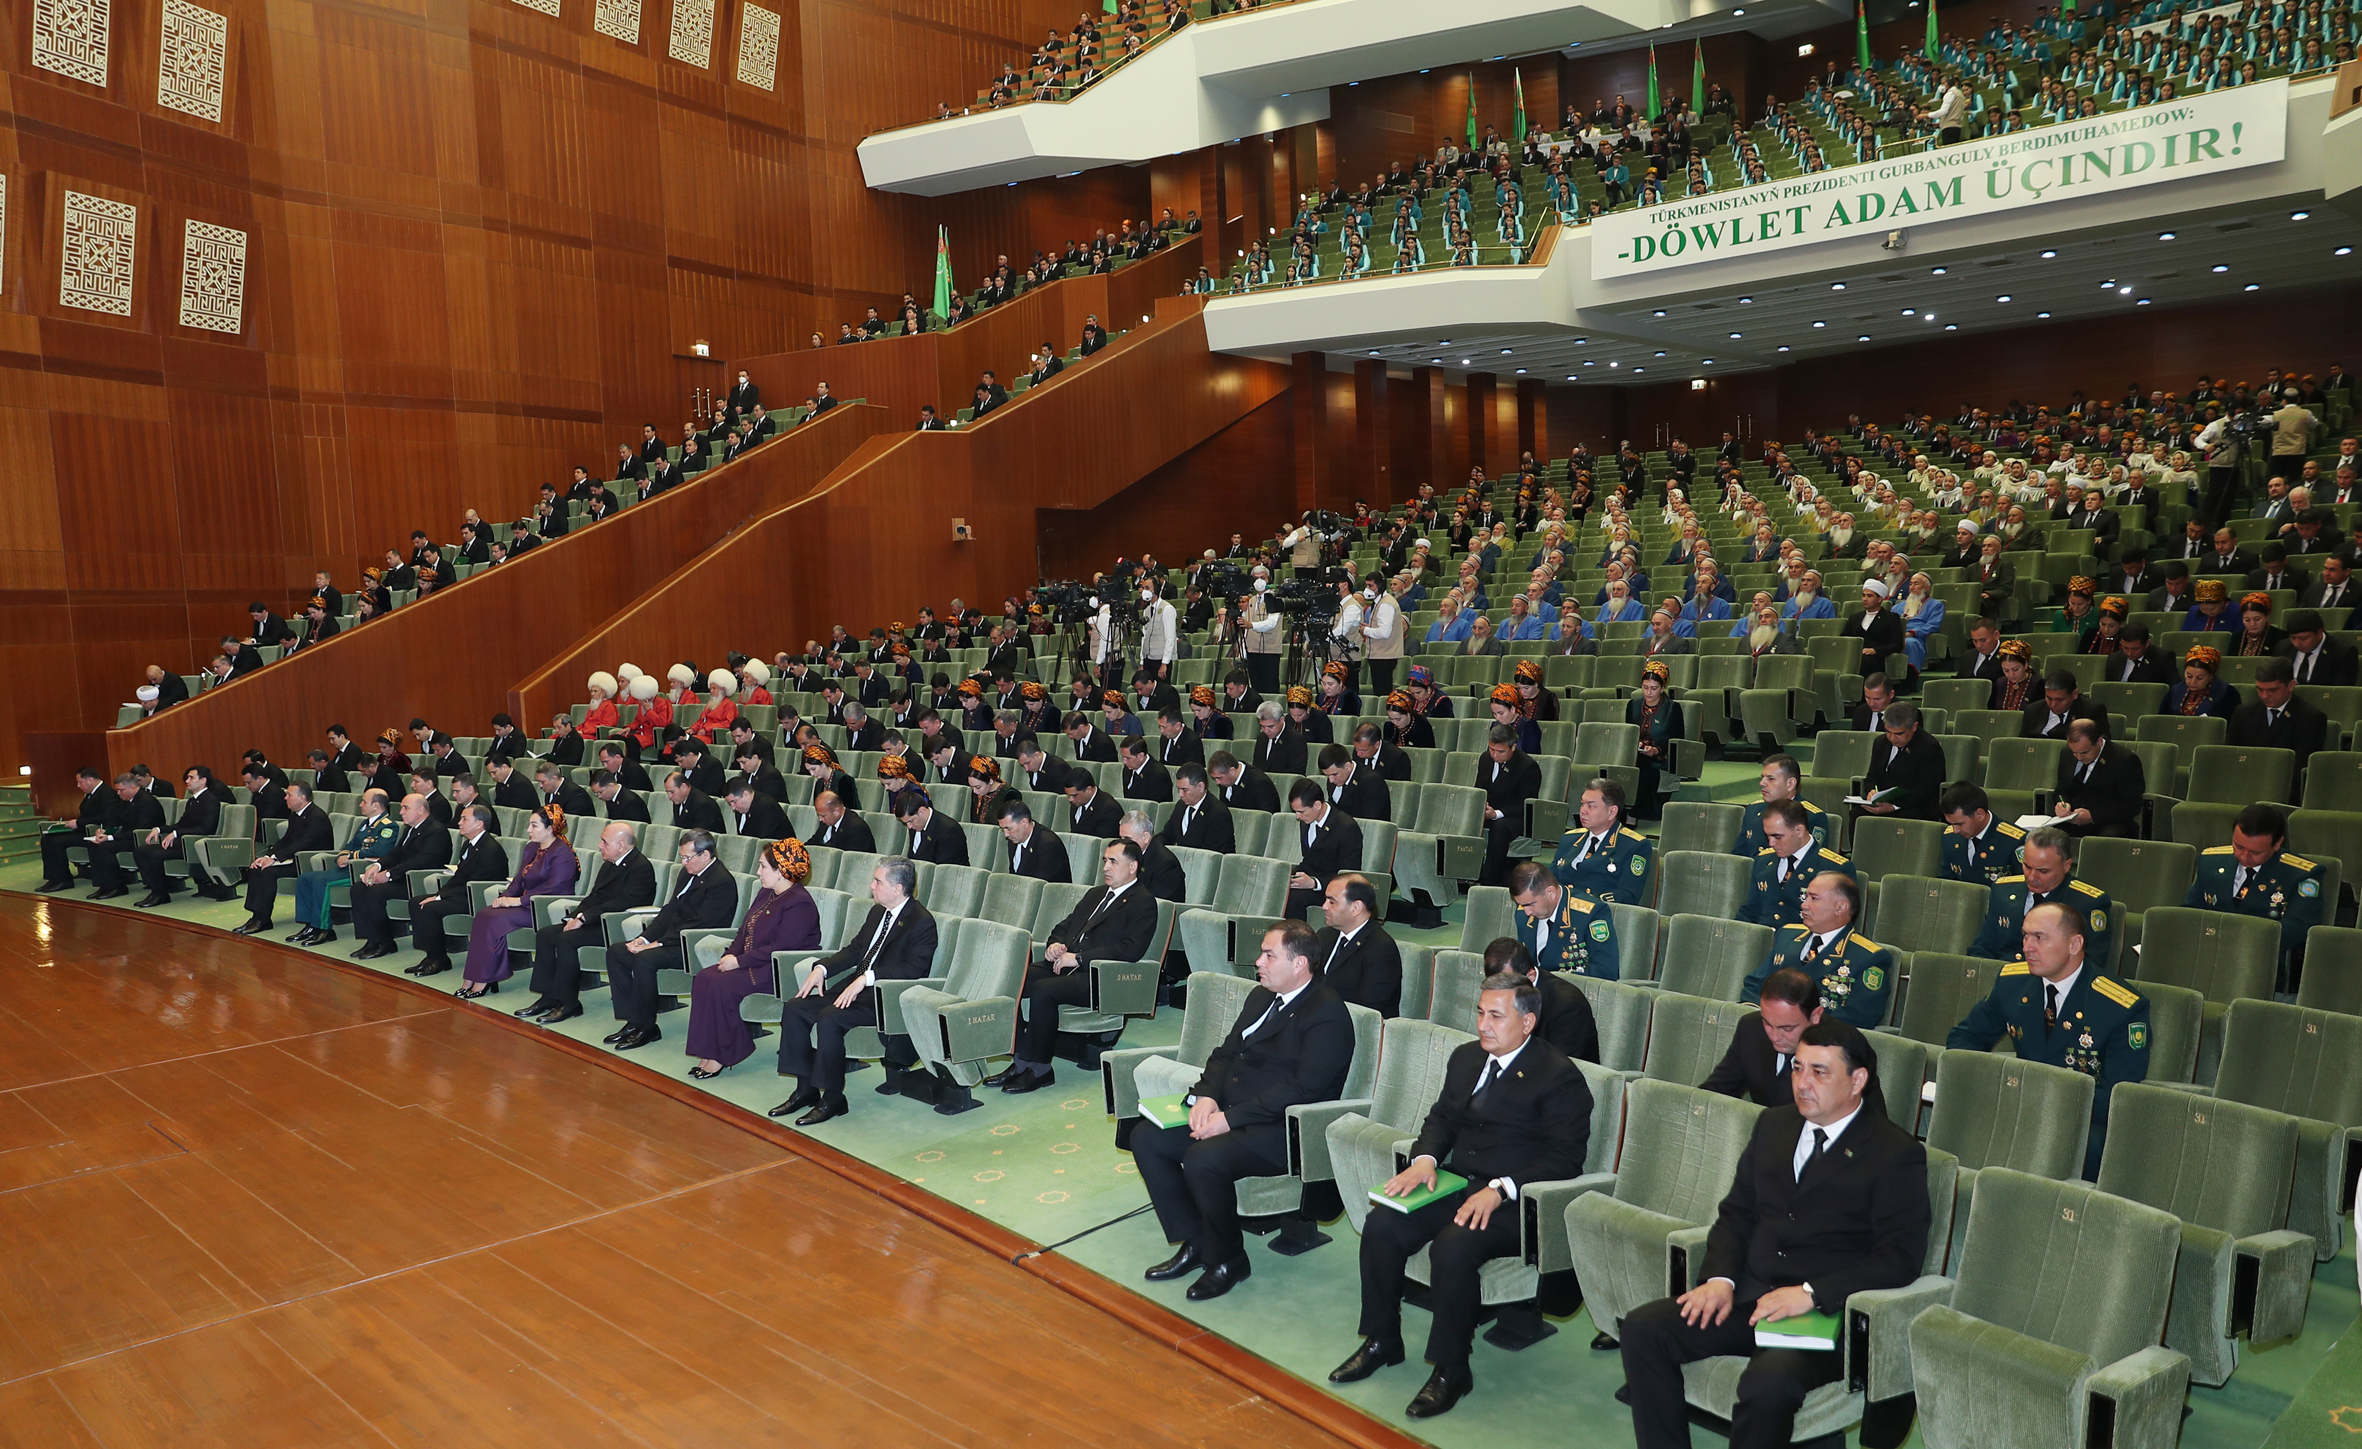 Solemn ceremony of inauguration of the President of Turkmenistan